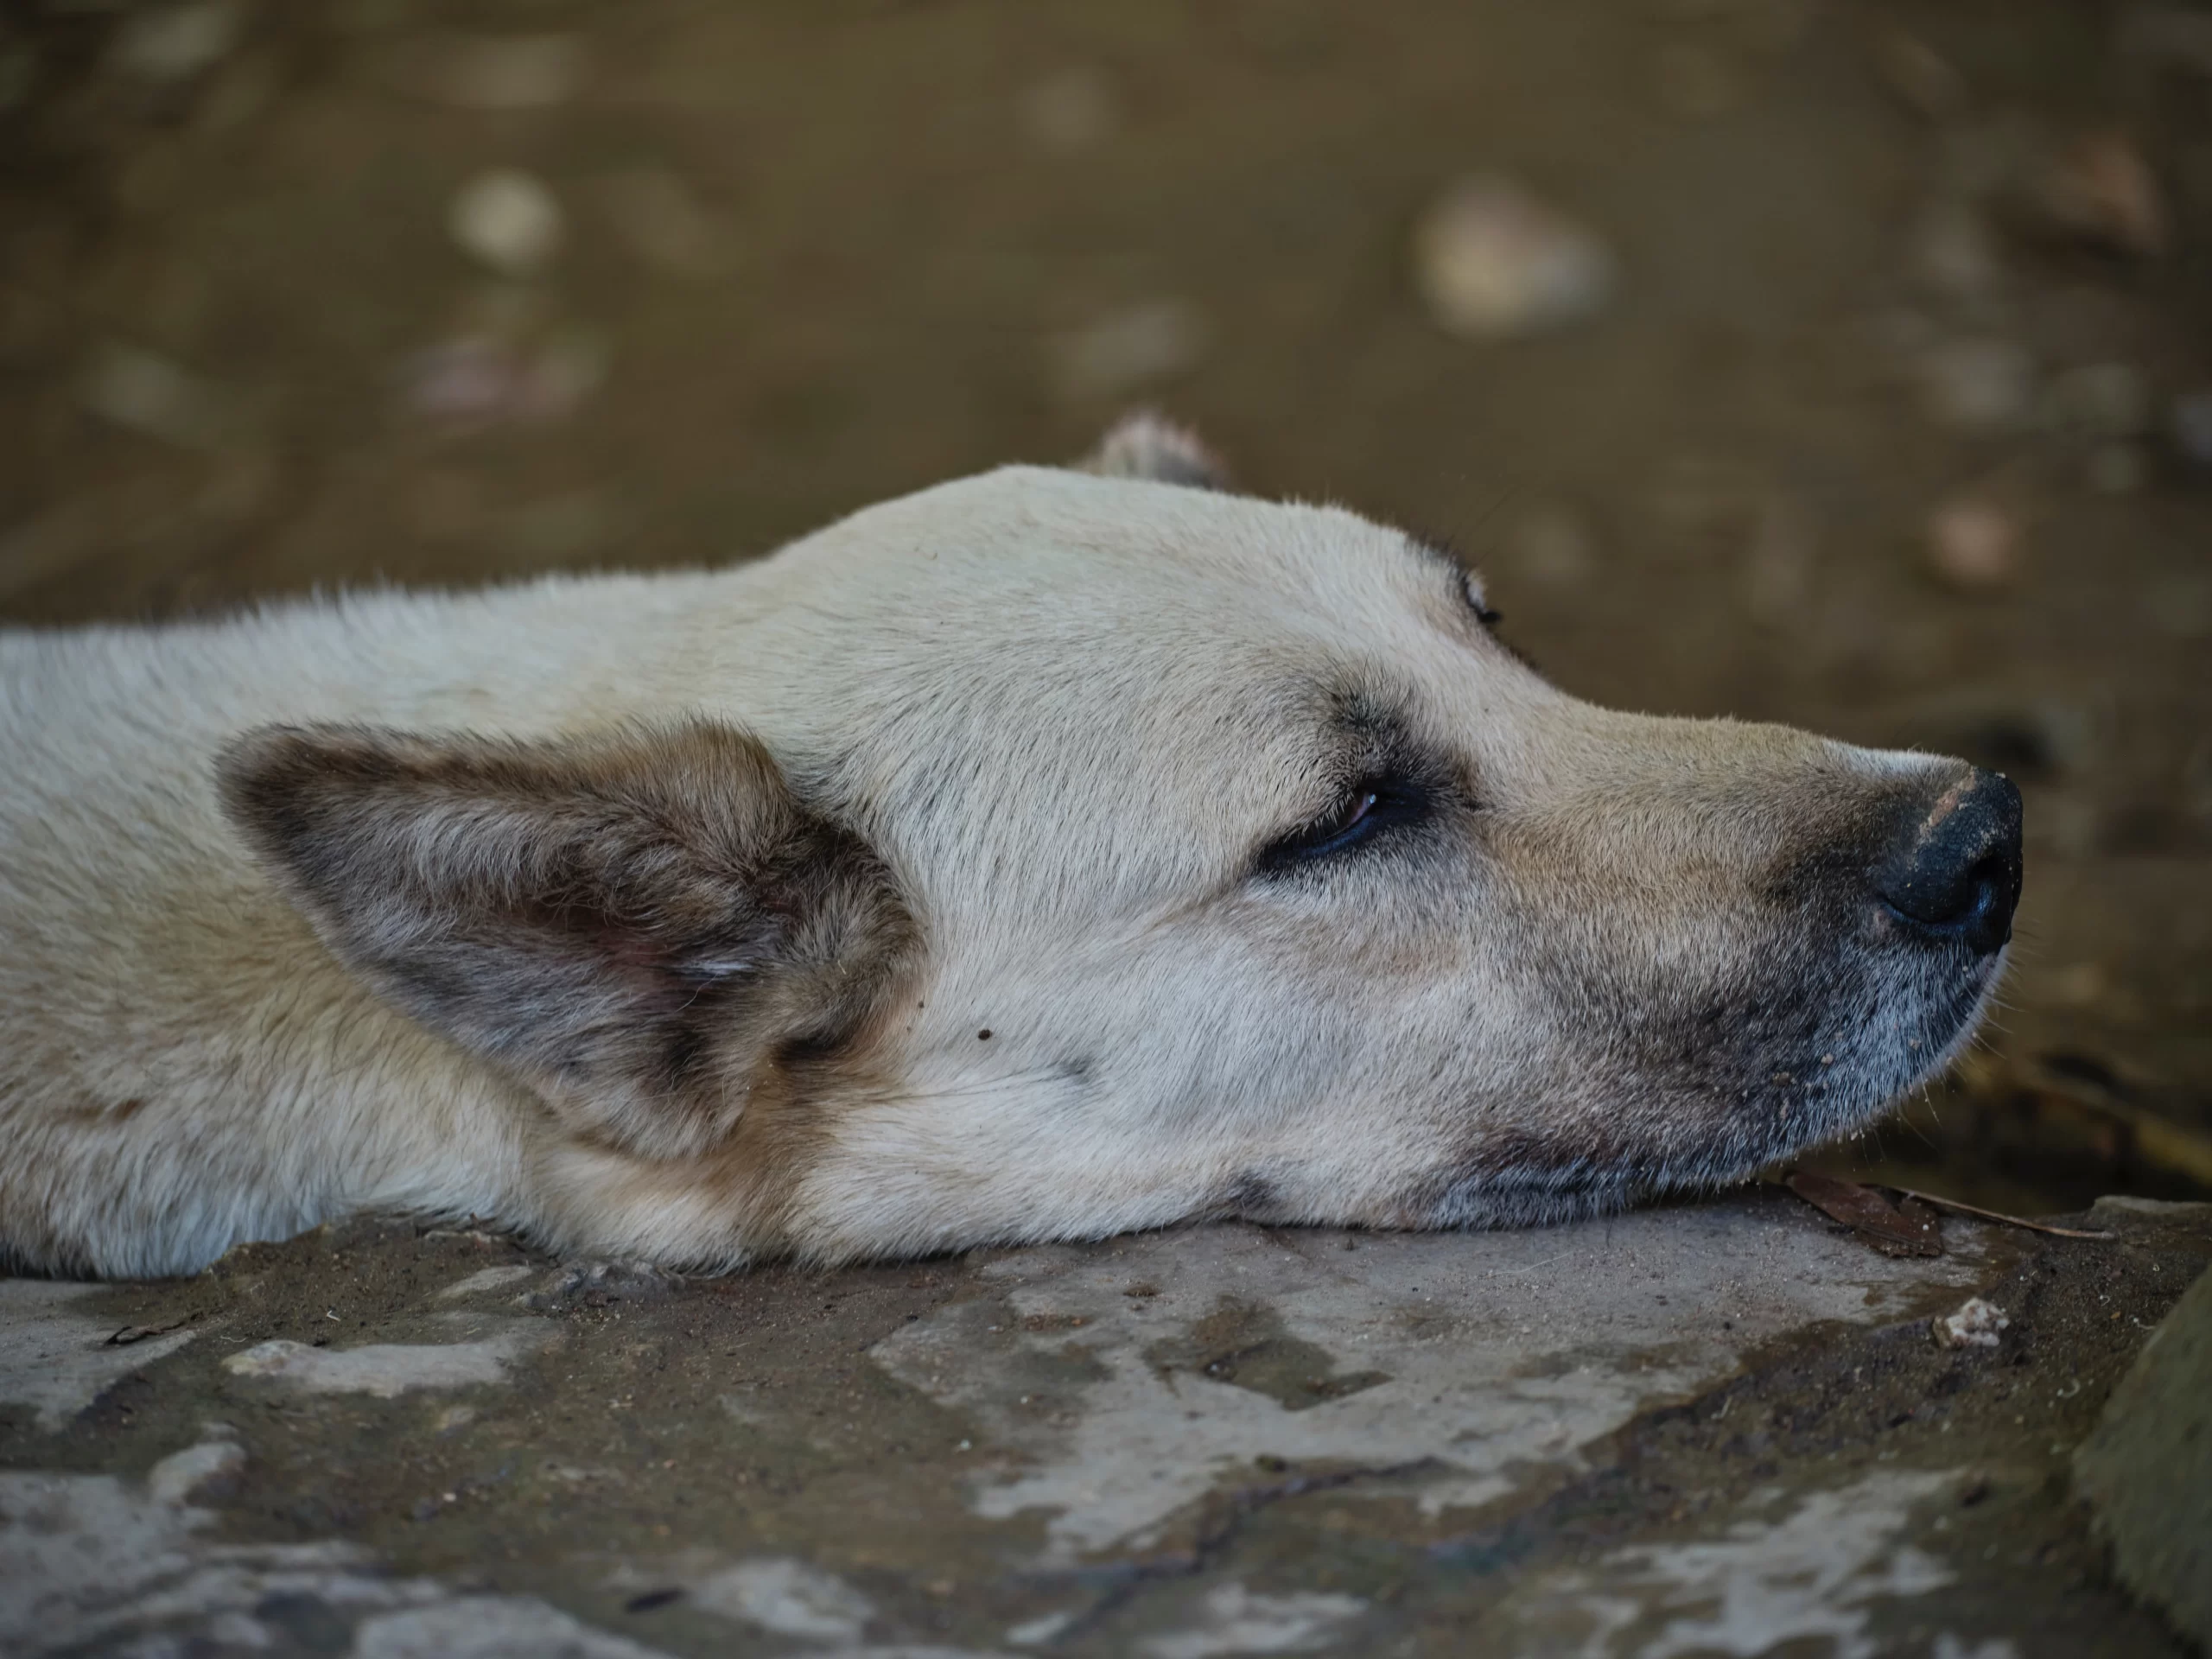 Published on June 1, 2022 FUJIFILM, GFX100S Free to use under the Unsplash License portrait of a cute dog sleeping